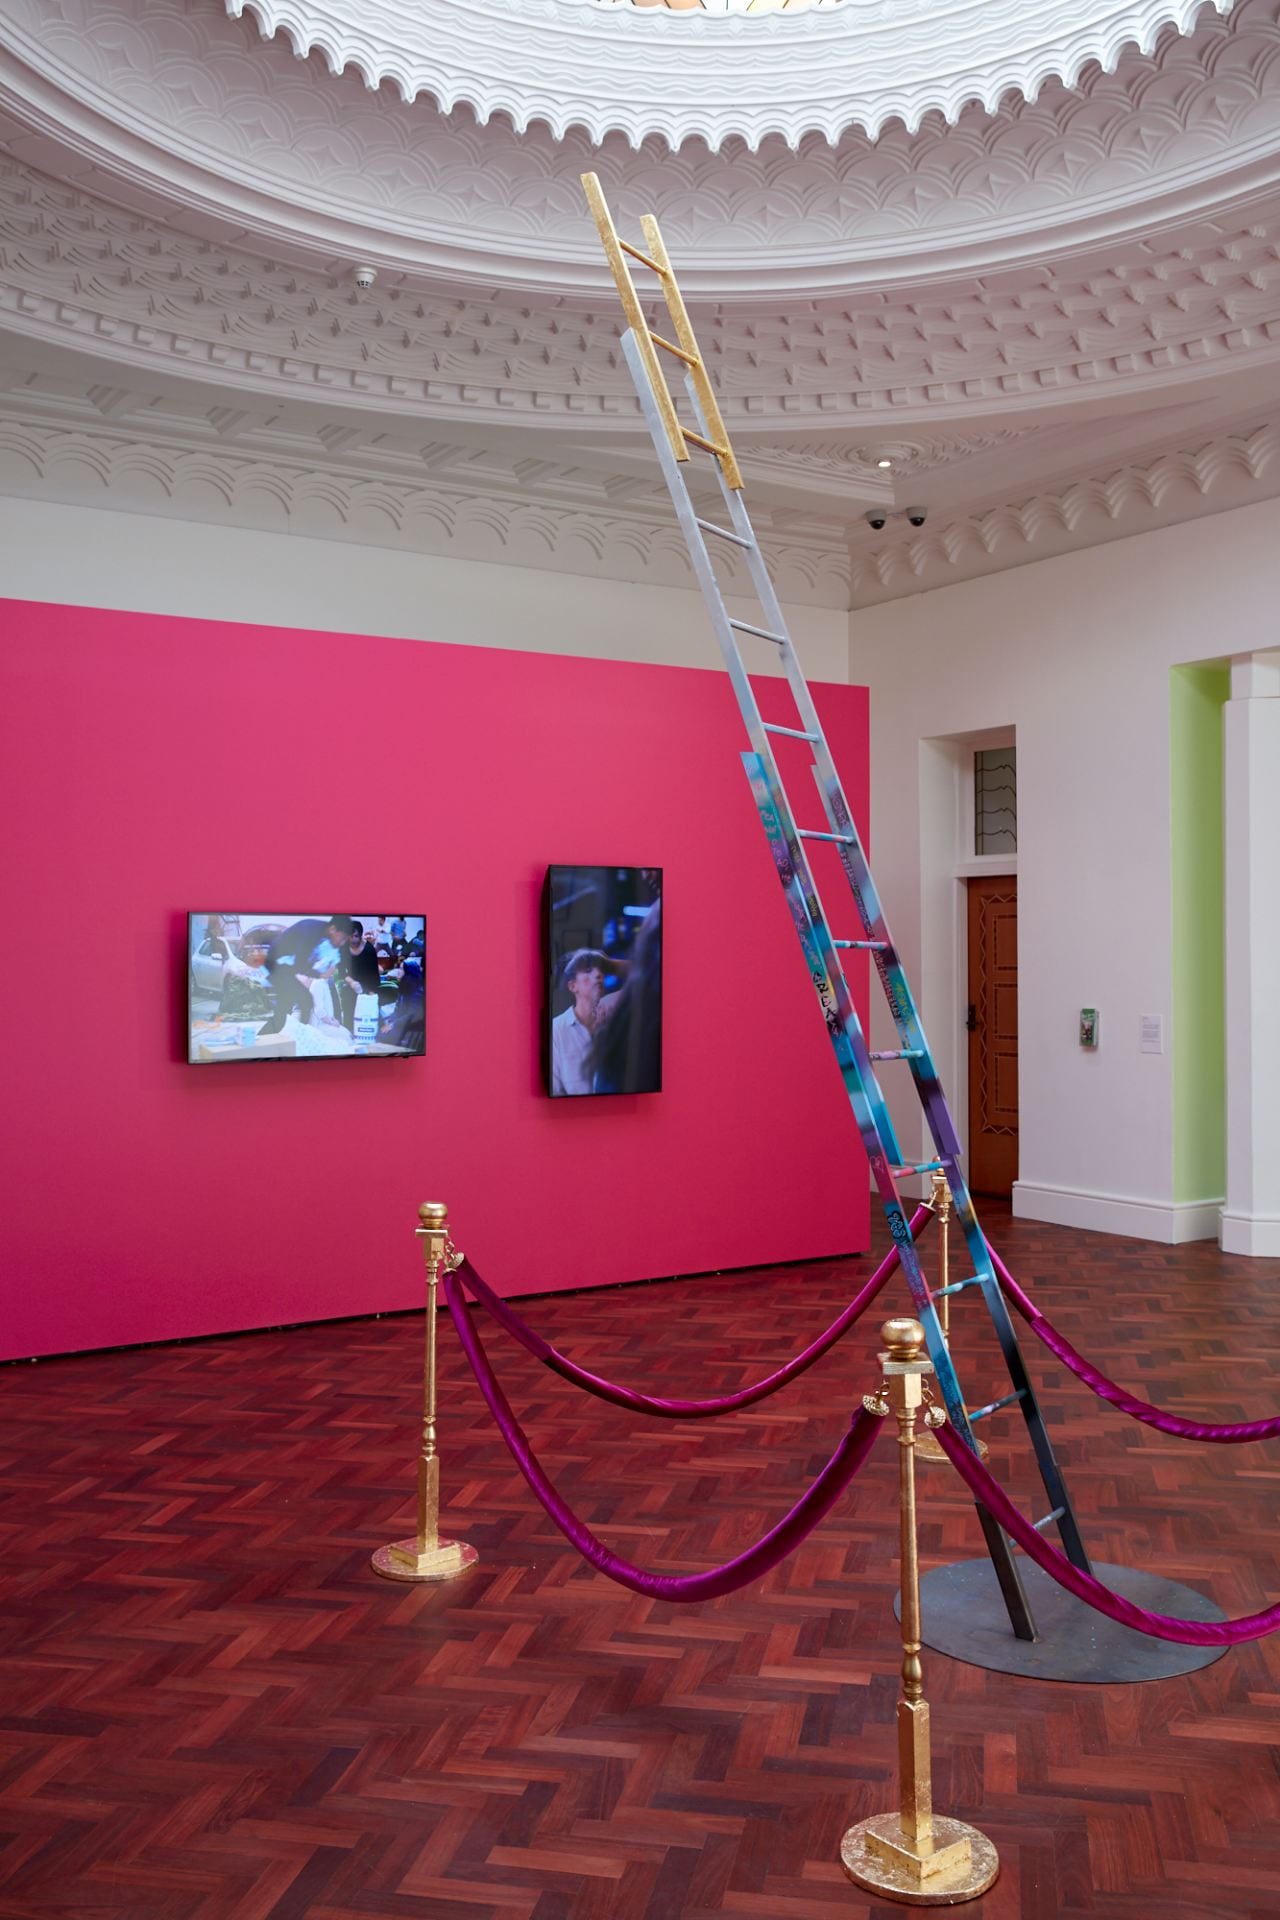 A gallery space with an elaborate dome ceiling and wooden floor. A hot pink wall in the background has two televisions hung on it. In the foreground, a ladder decorated with graffiti and gilded at the top stretches towards the ceiling, surrounded by gold bollards with velvet pink ropes.